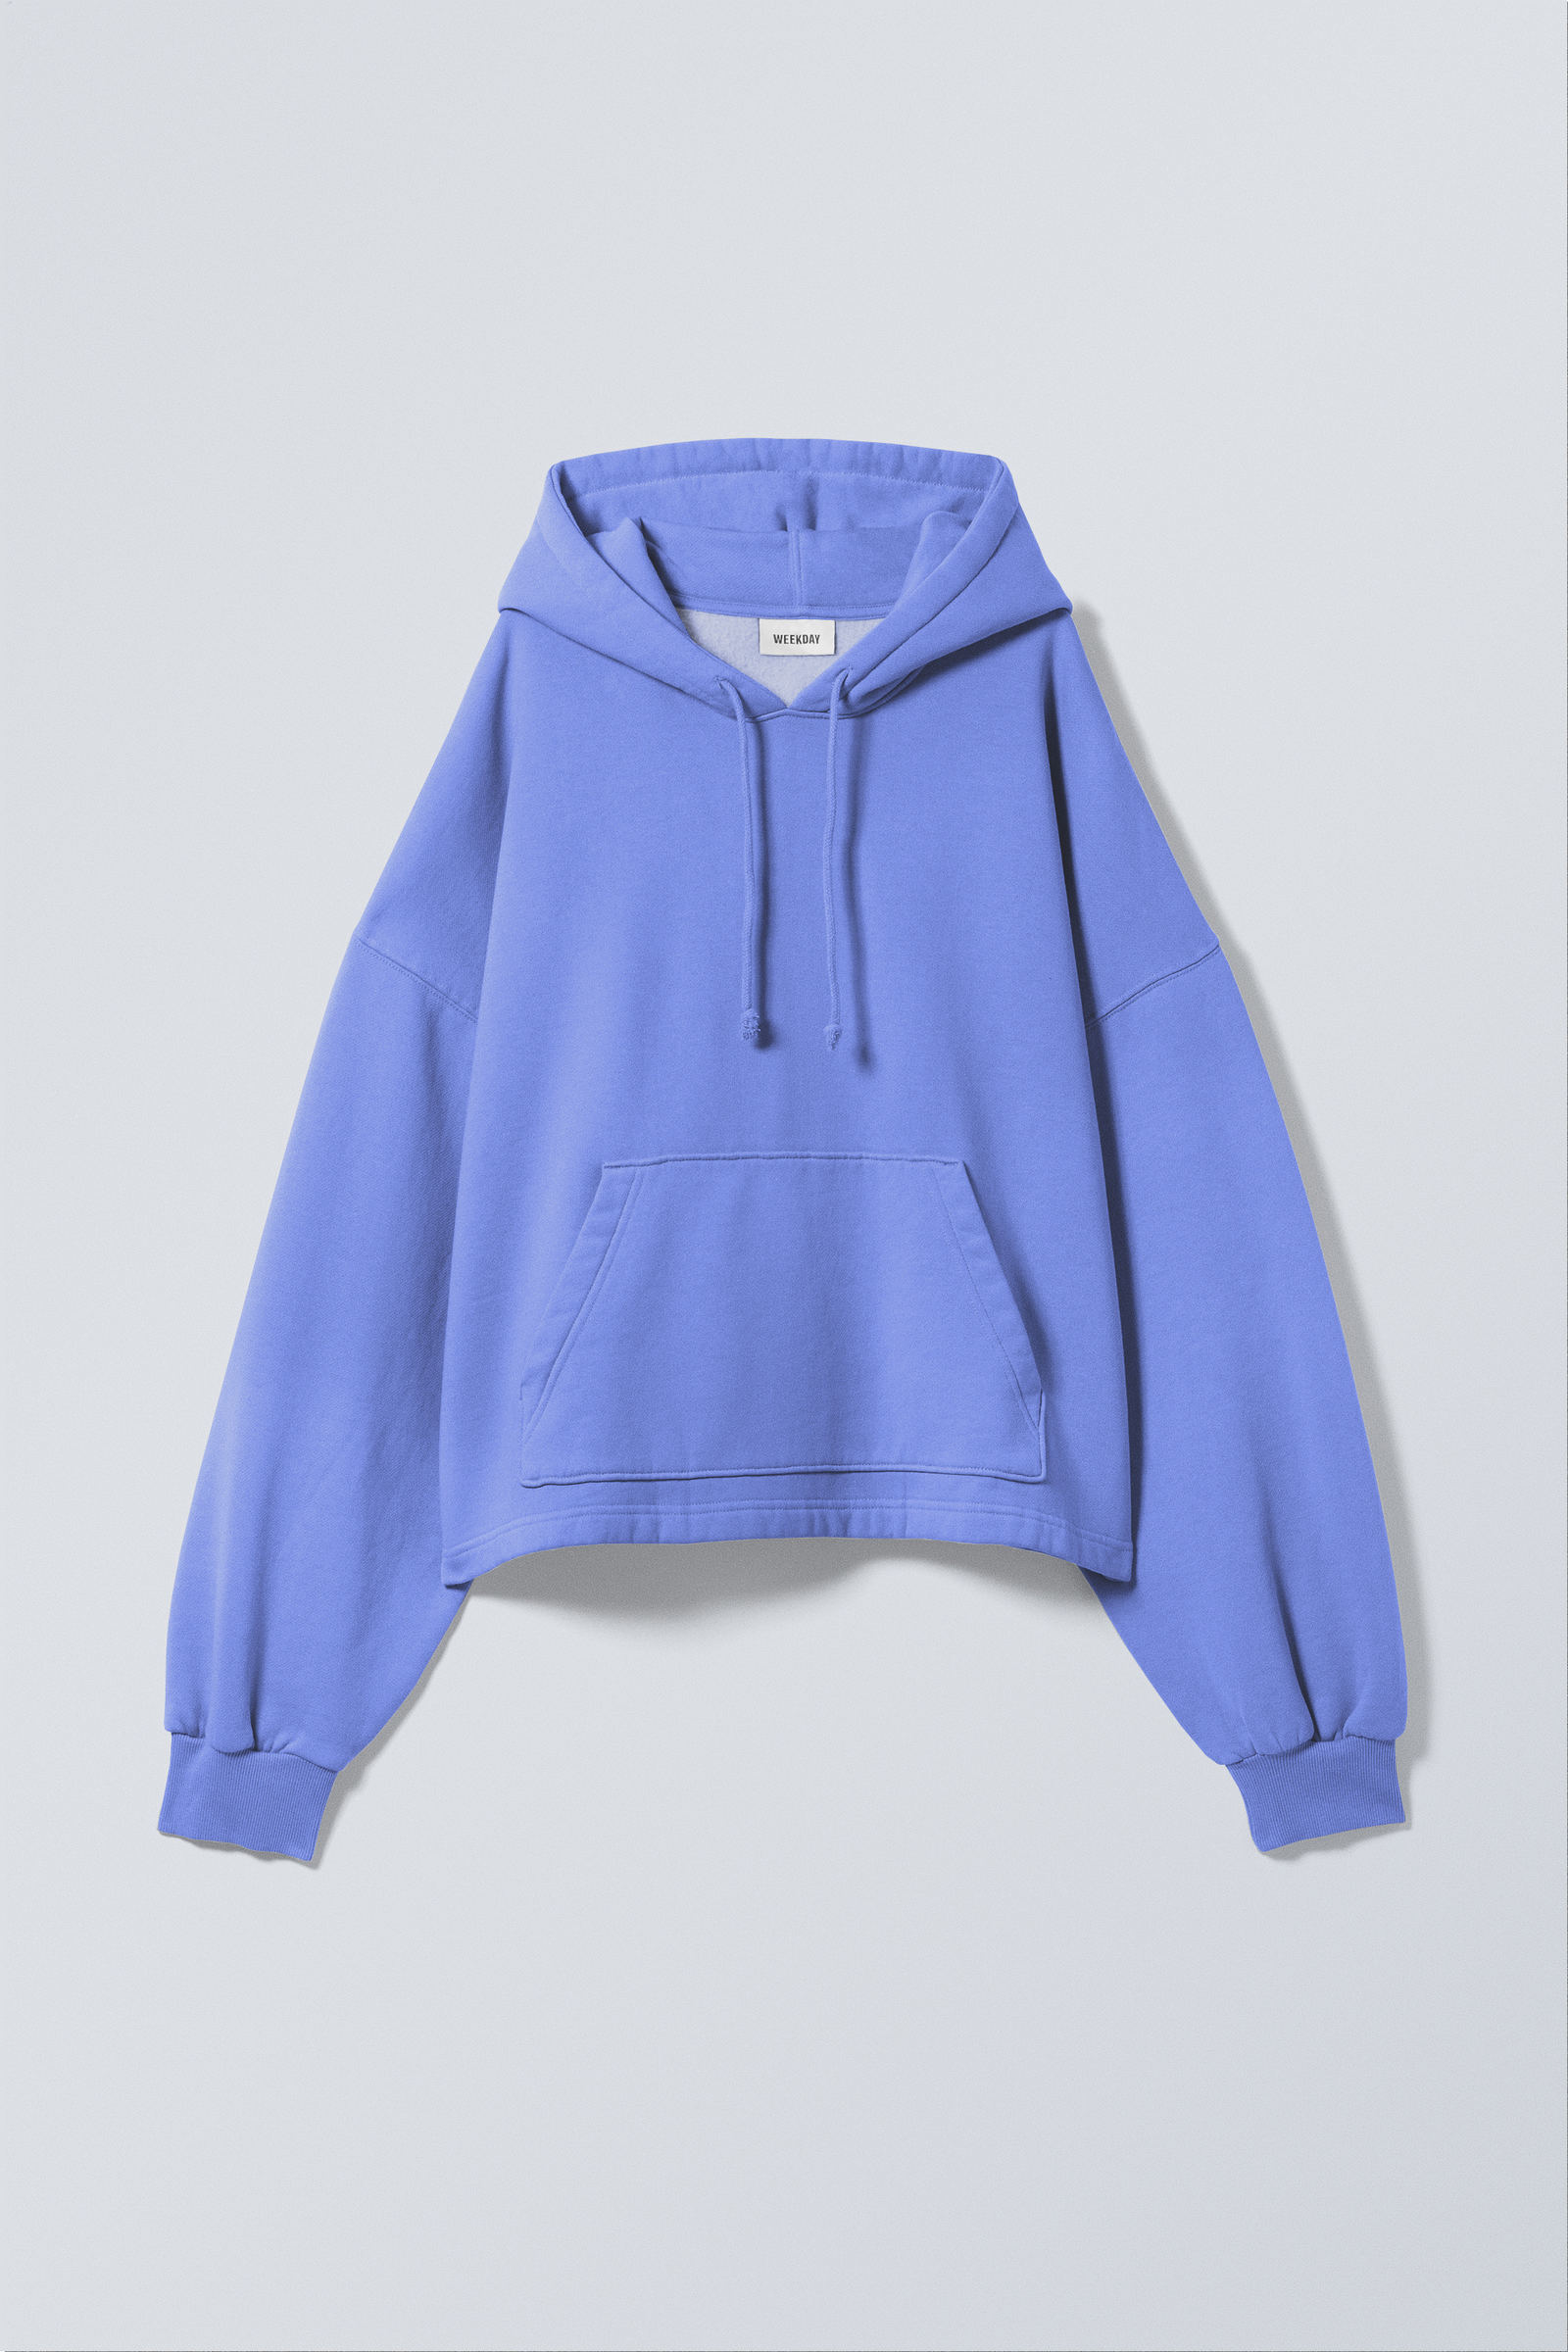 Bright Blue - Square Oversized Heavyweight Hoodie - 3